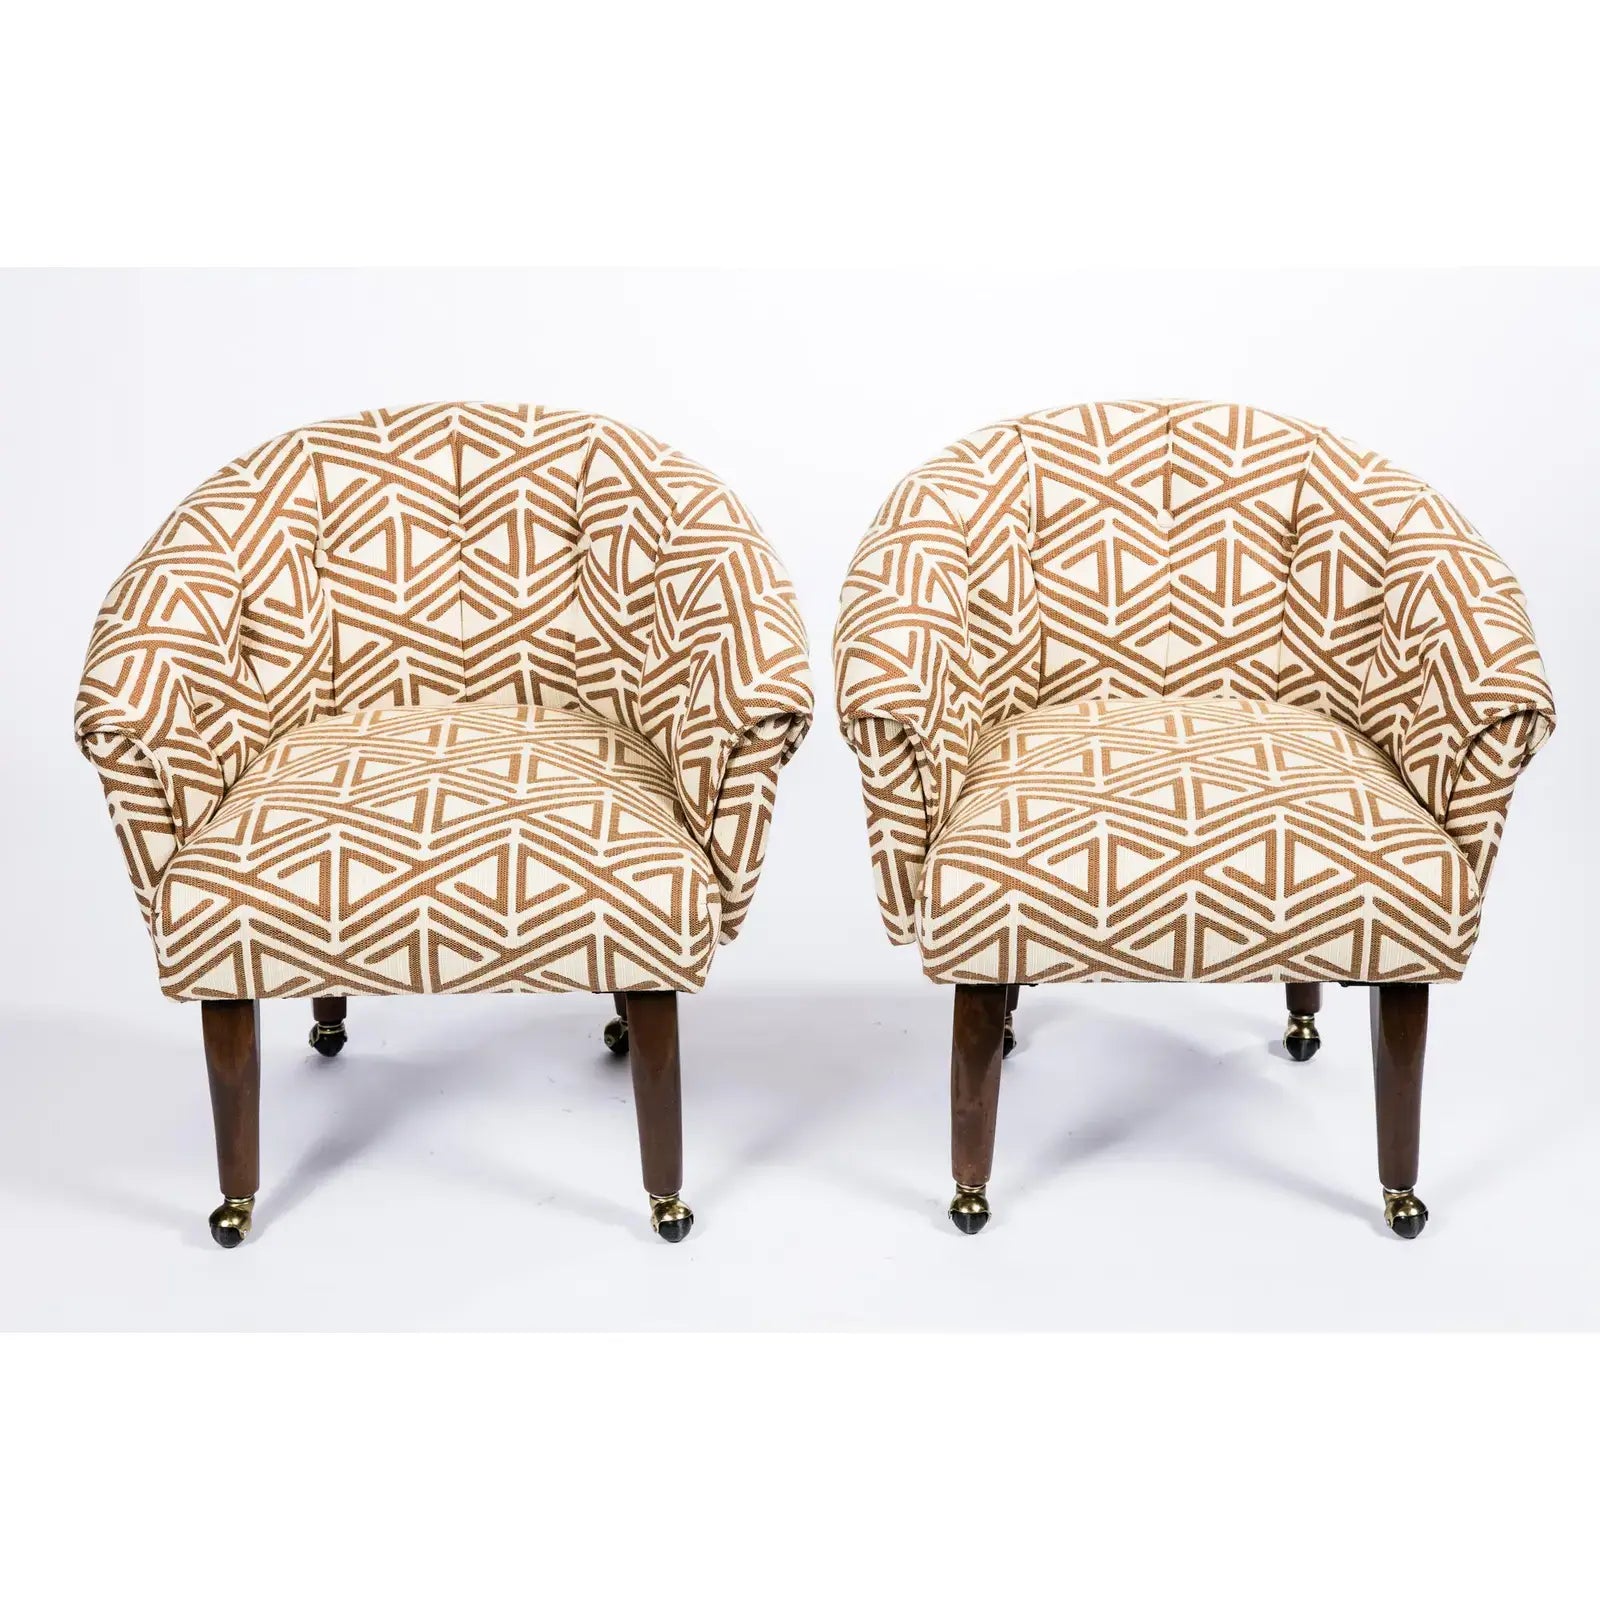 Patterned Vintage Tufted Chairs (Pair)